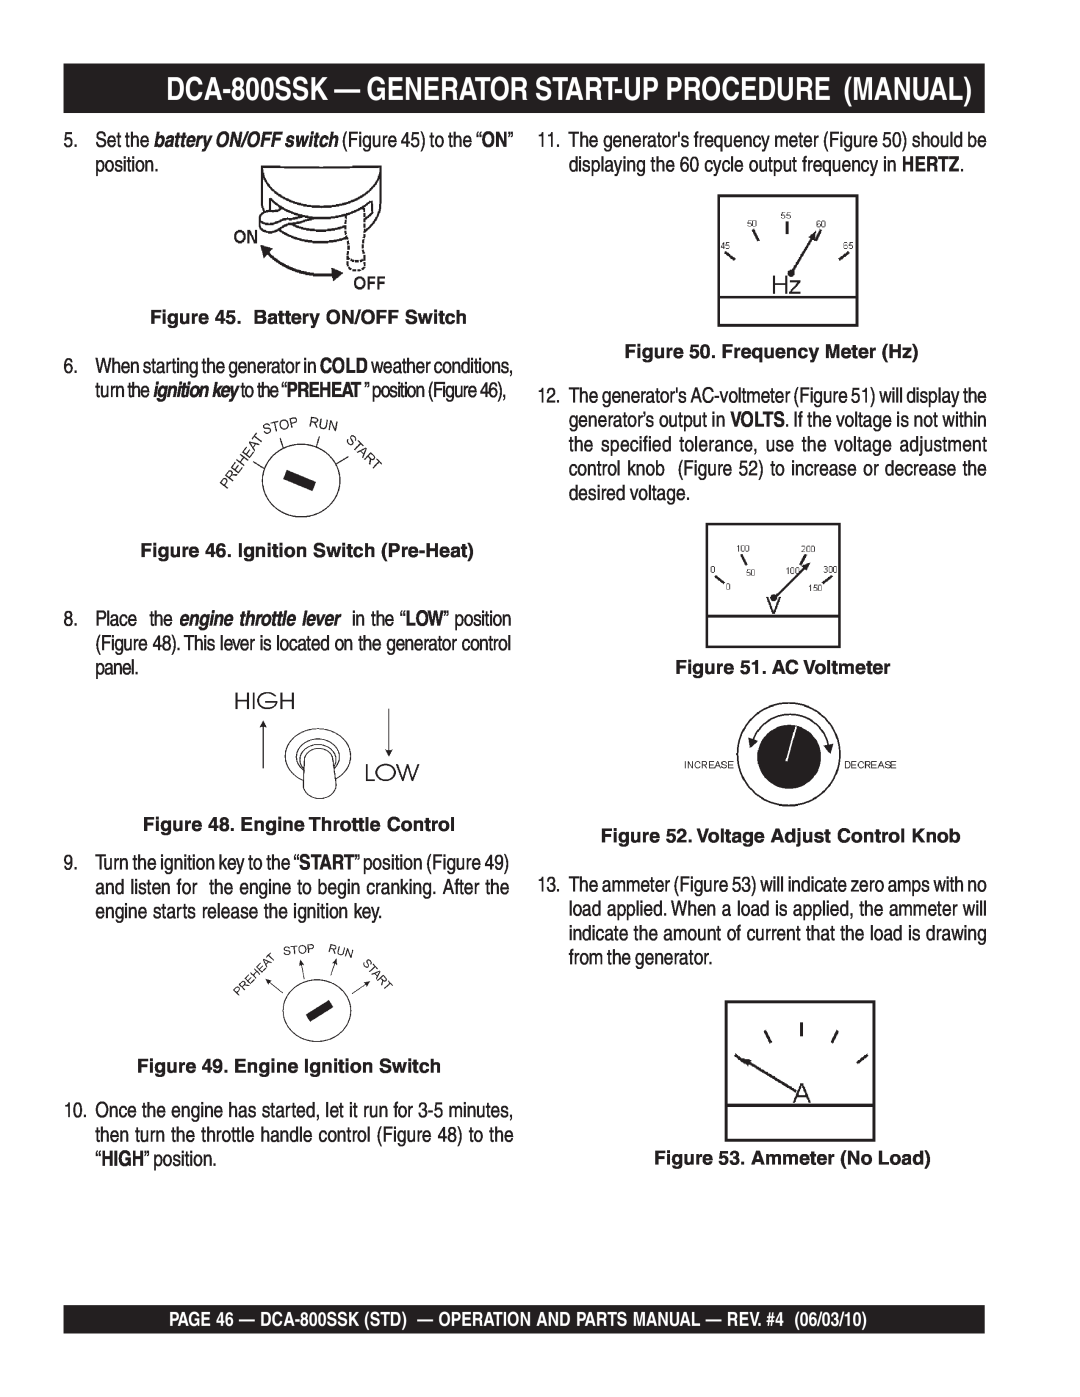 Multiquip DCA-800SSK - GENERATOR START-UP PROCEDURE MANUAL, Set the battery ON/OFF switch to the “ON” position 